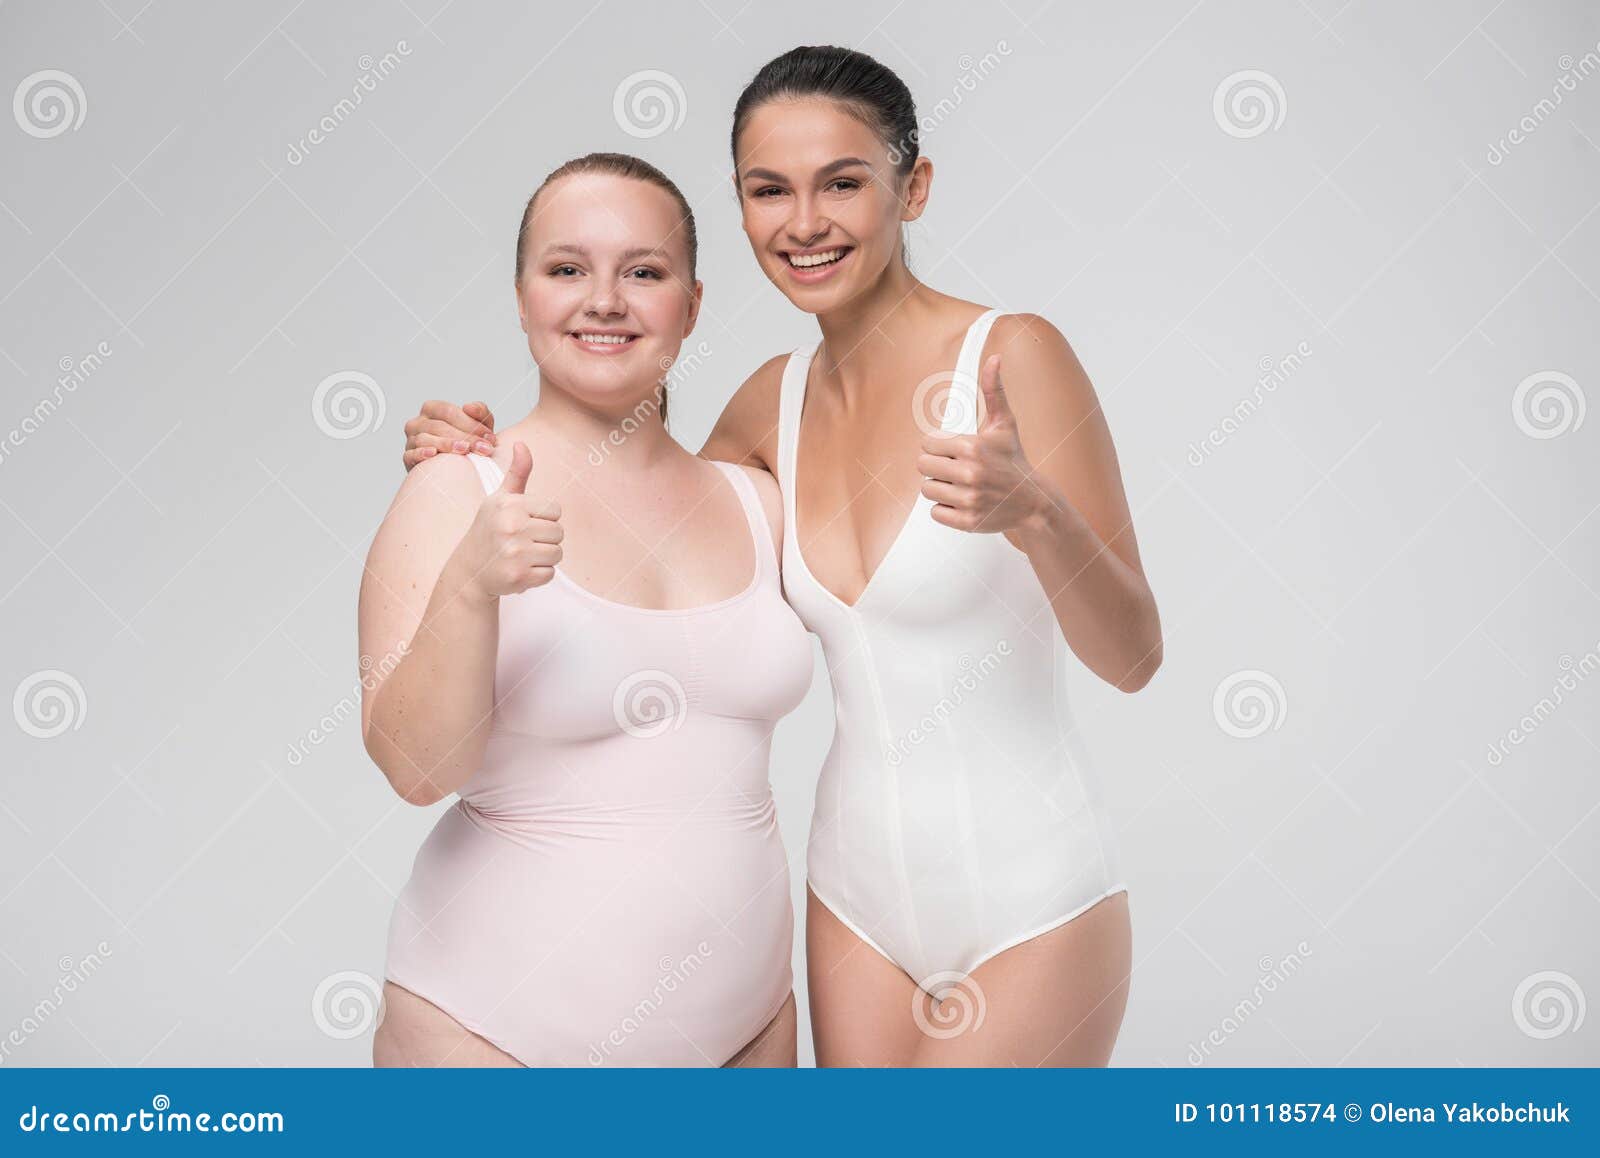 2014 Chubby Mom Images, Stock Photos & Vectors